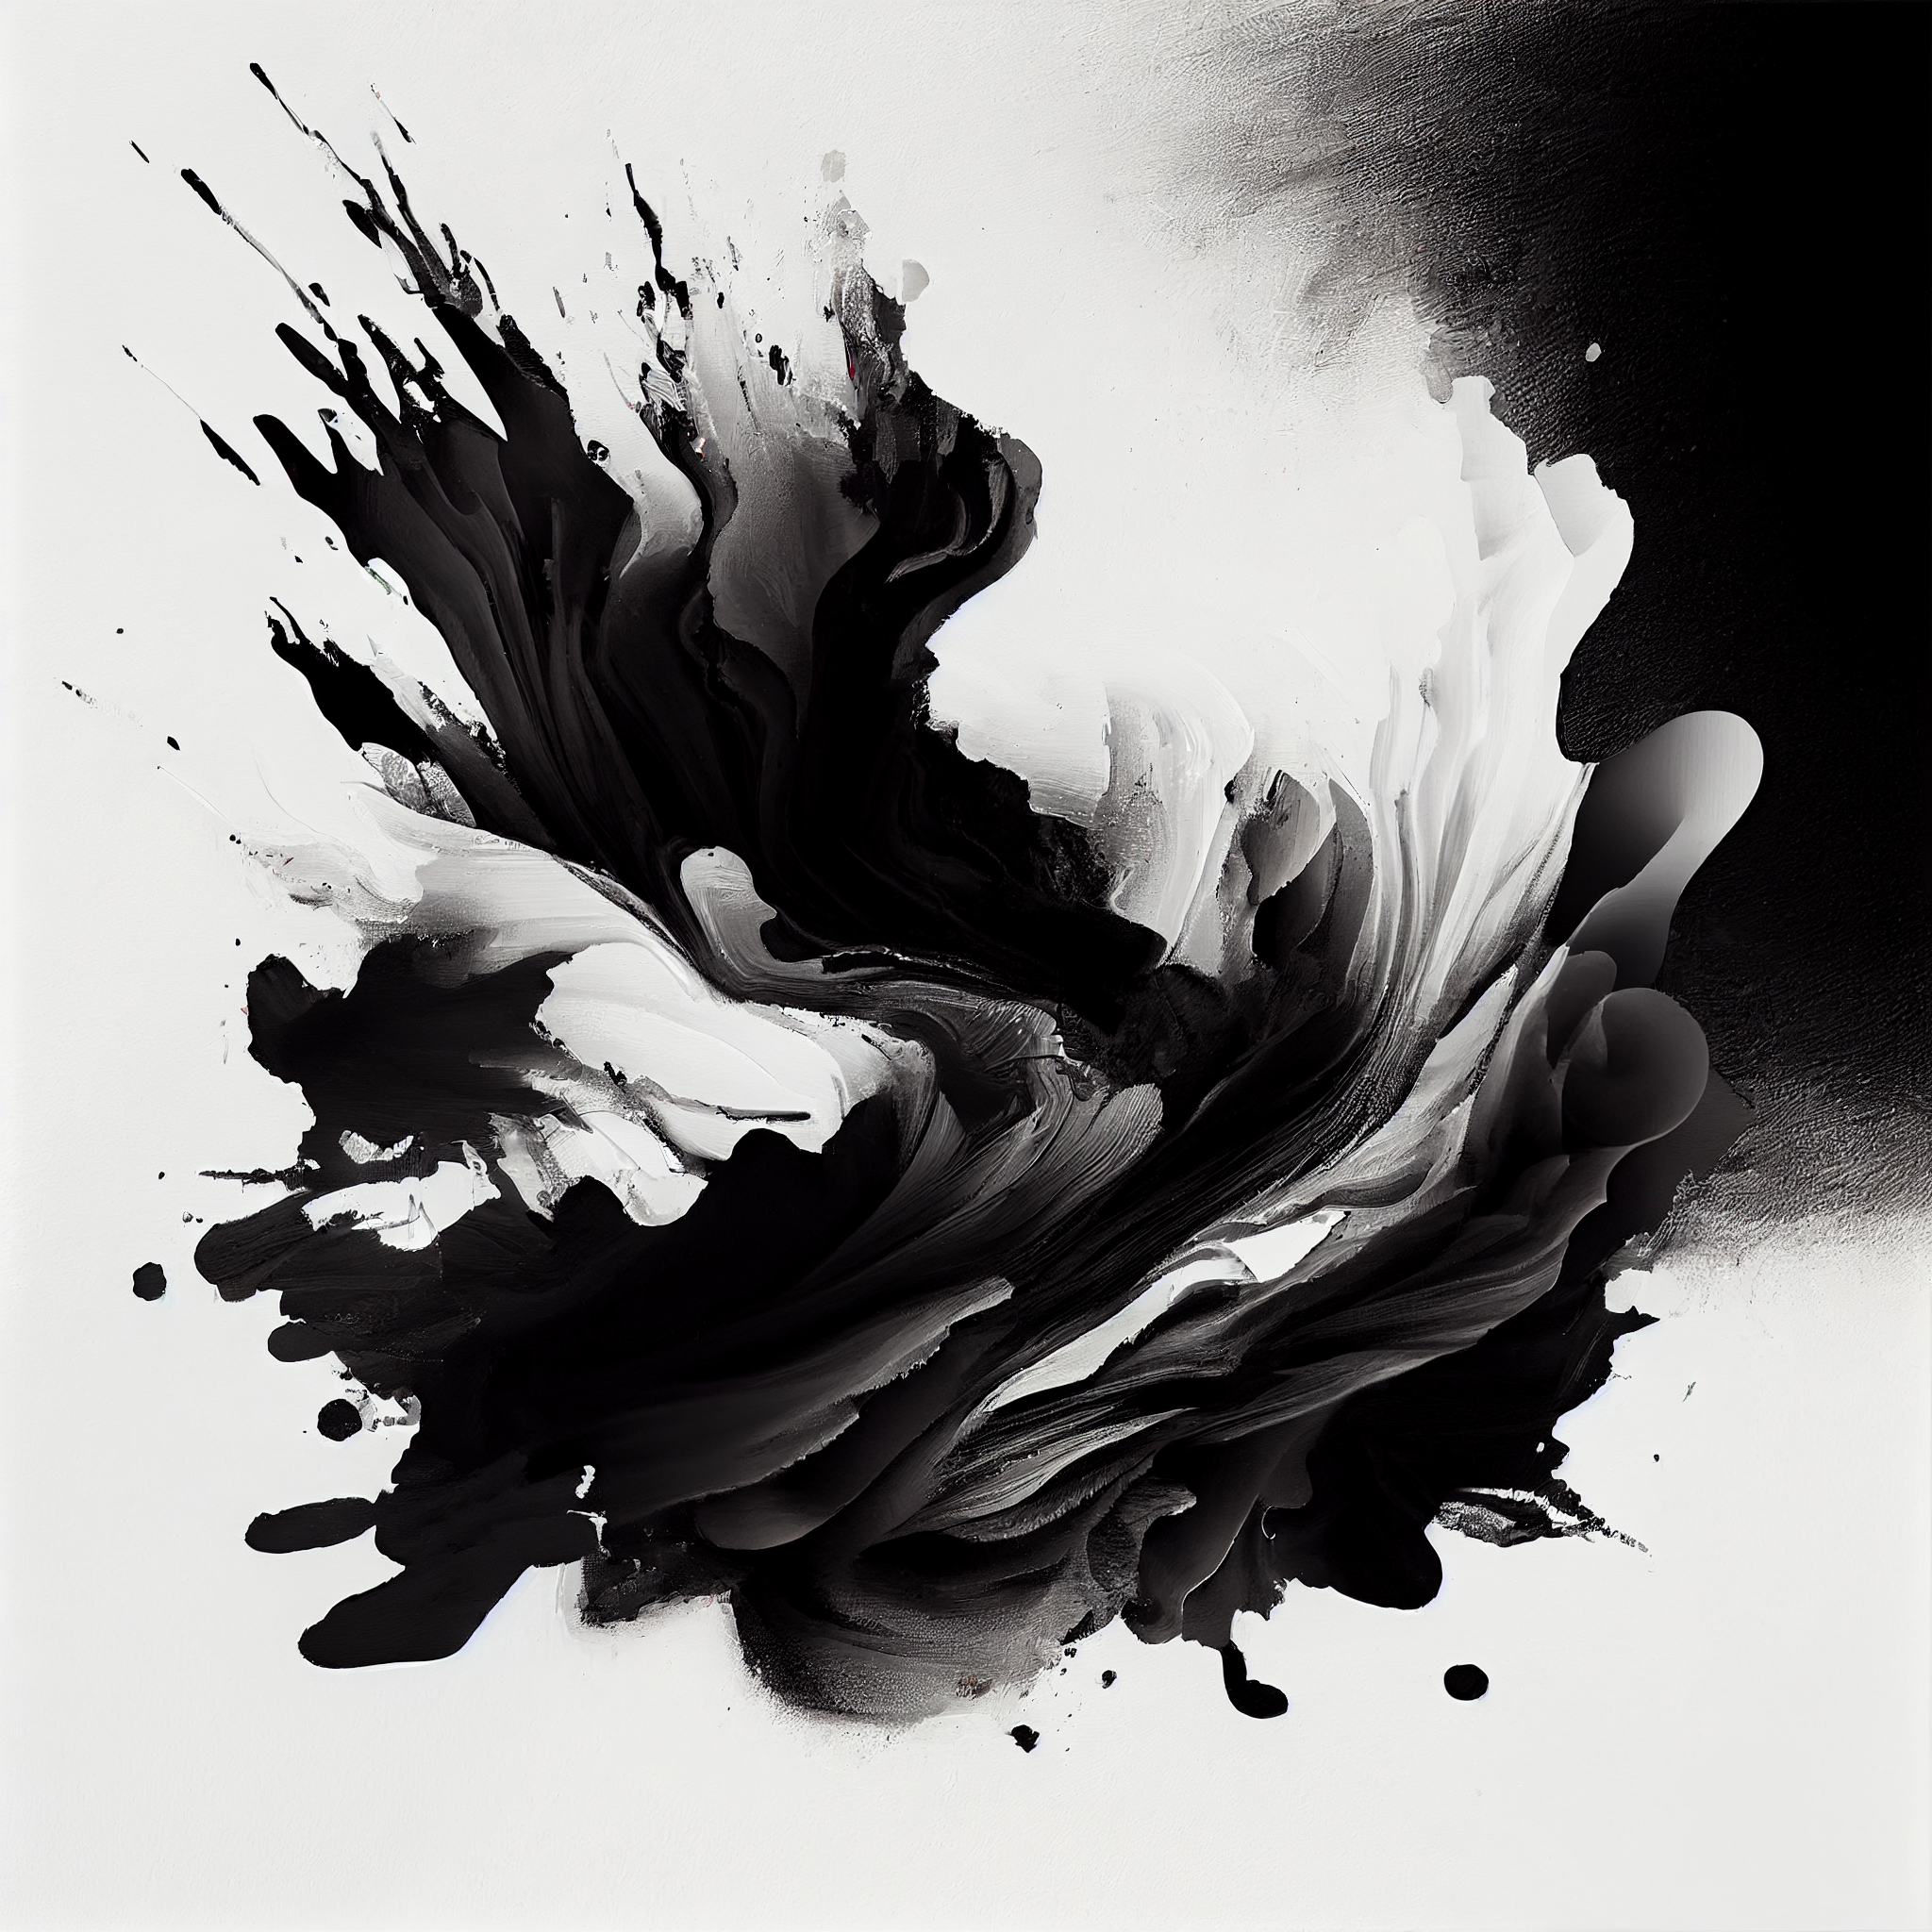 Flowing Lines: A Bold Black and White Abstract Art Print